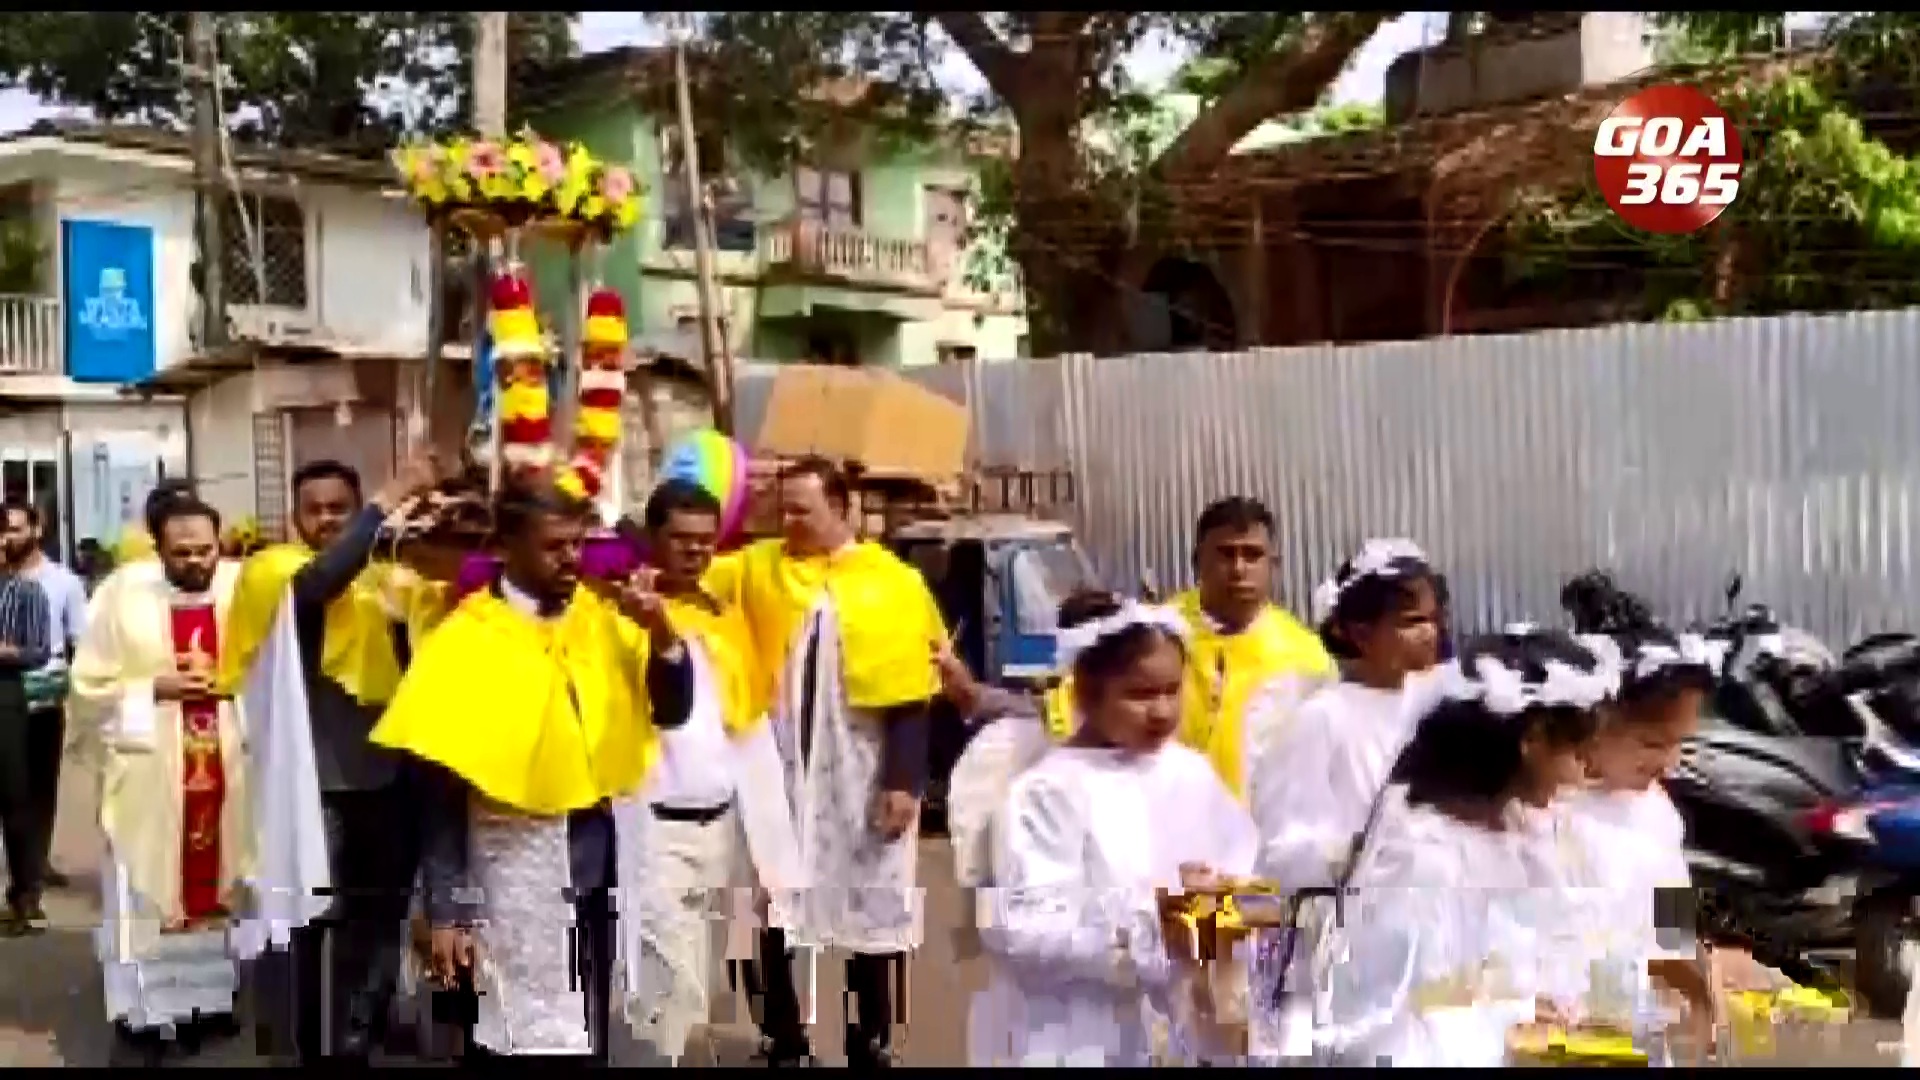 Our Lady of Candelaria Feast celeberated in Calangute || Goa365